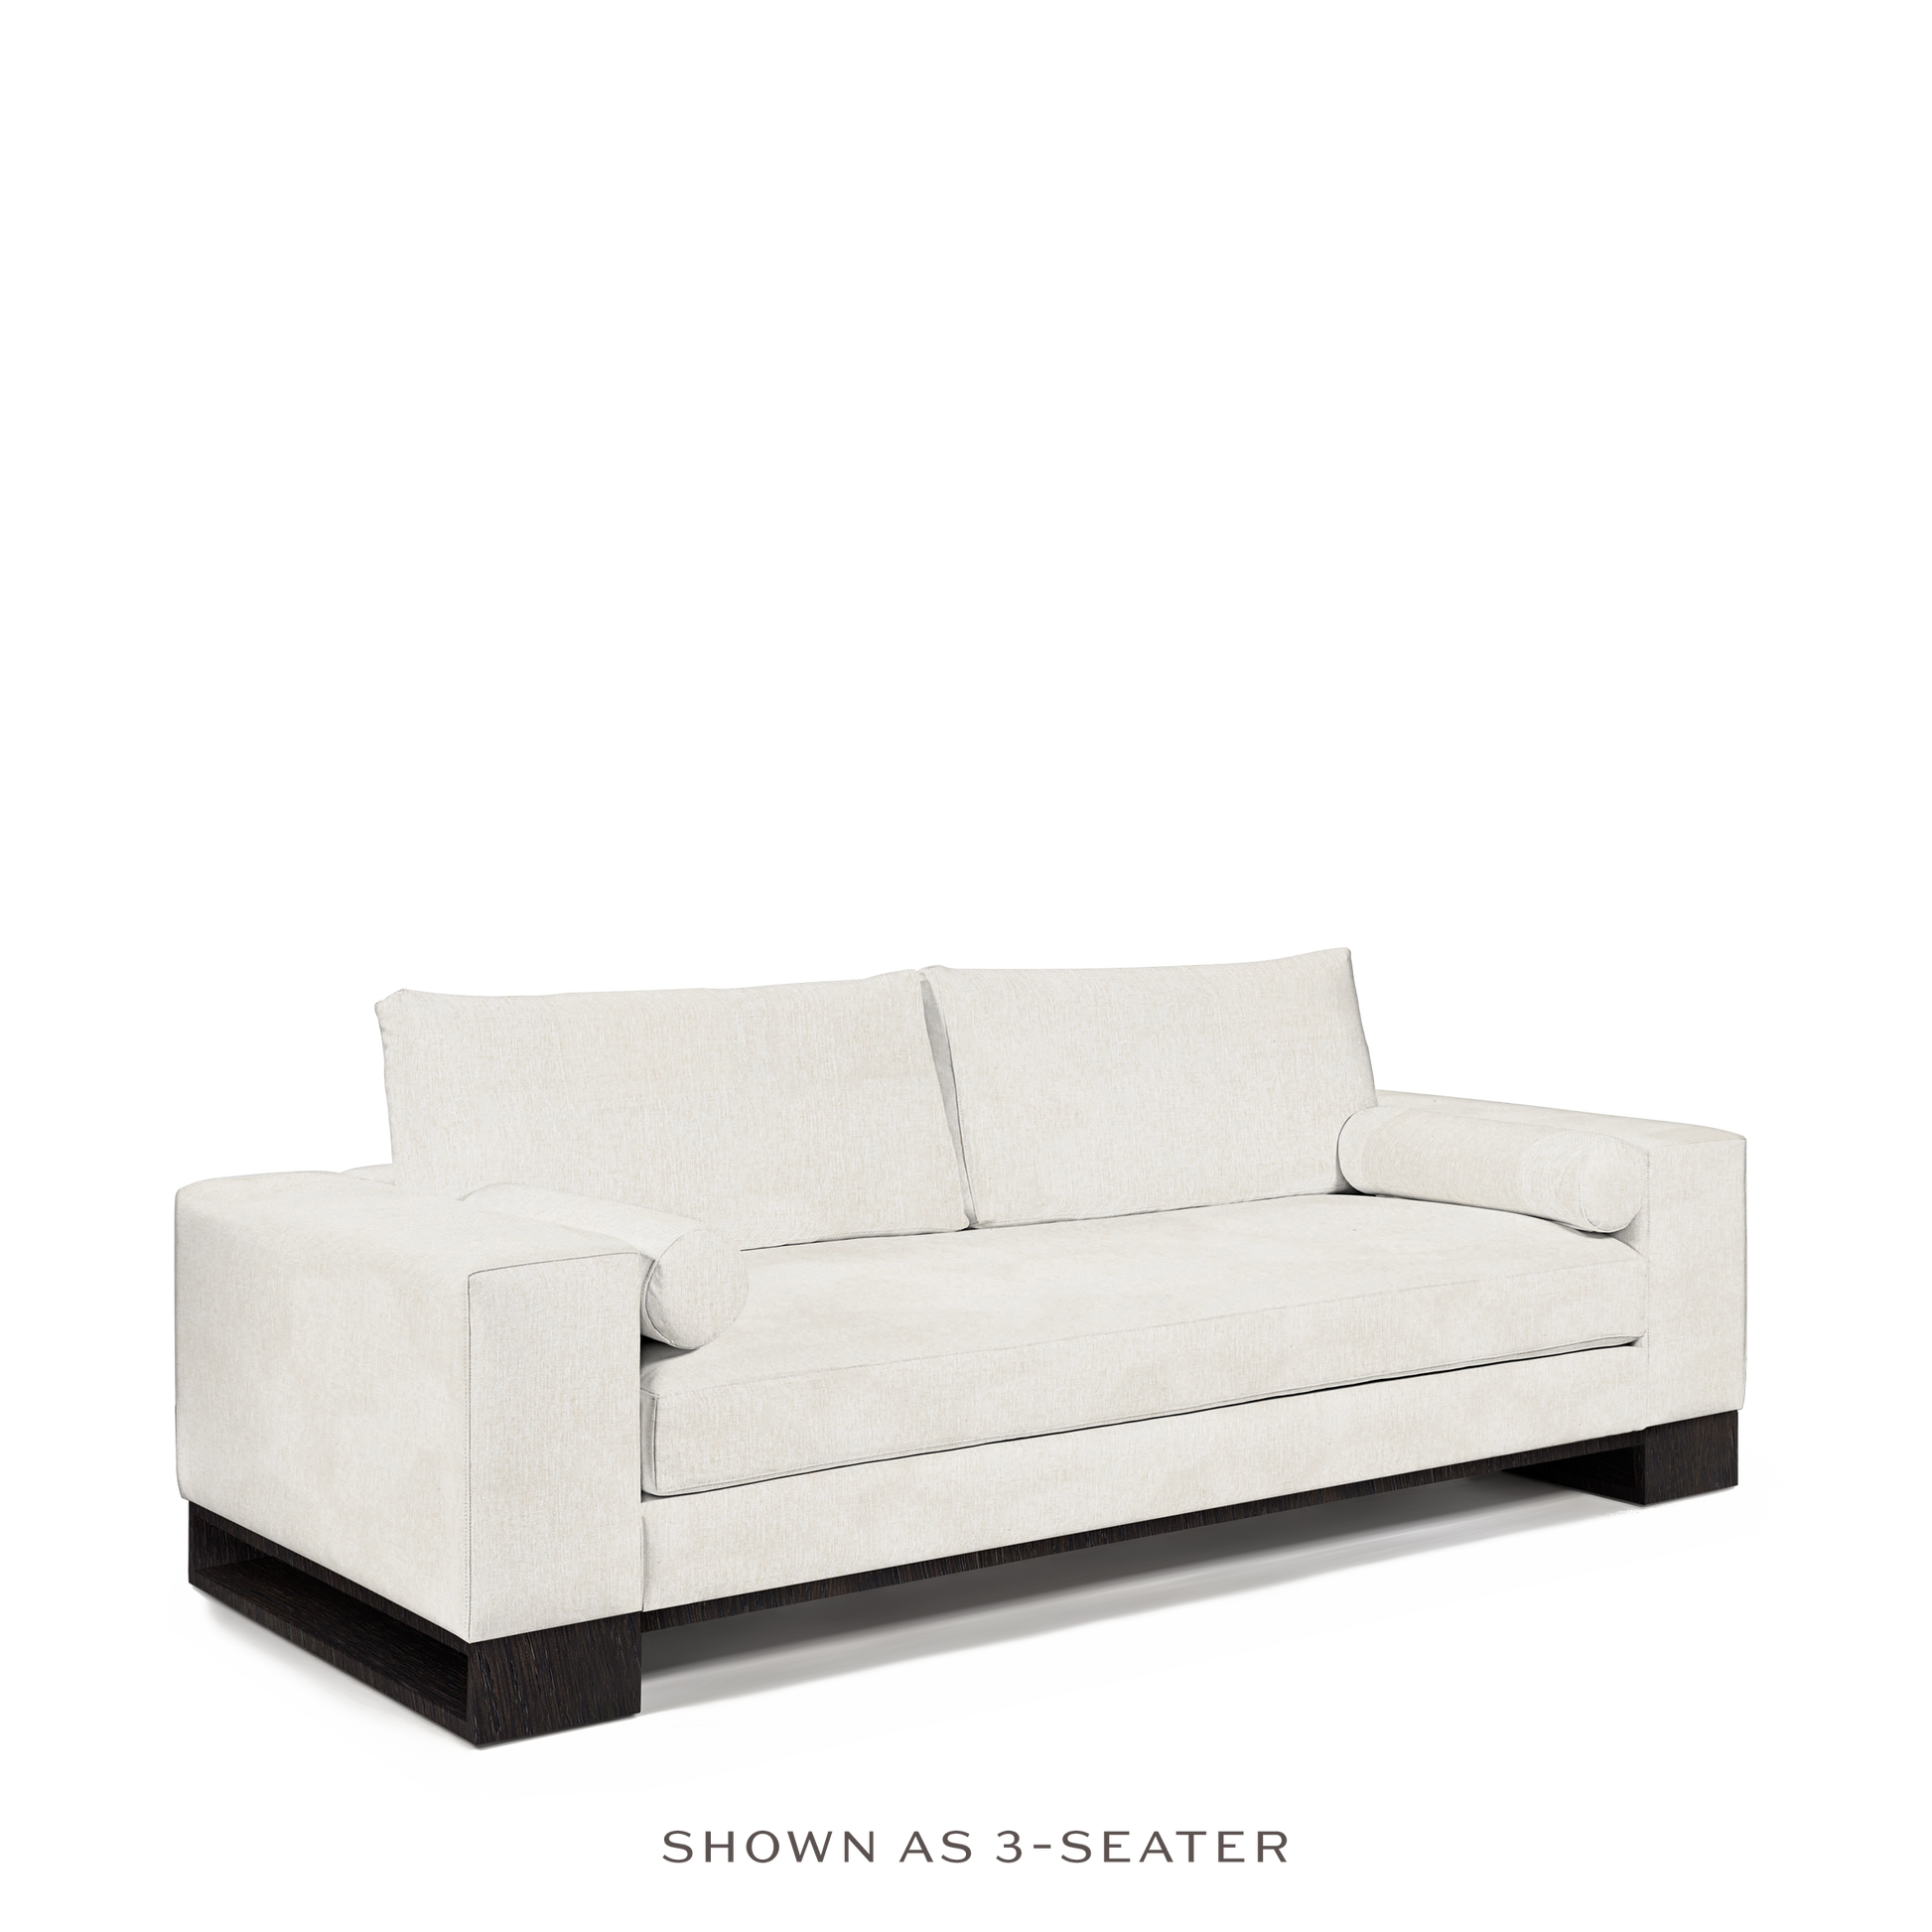 TERRA 3-seater sofa with bolt white textile and chocolate wood legs 